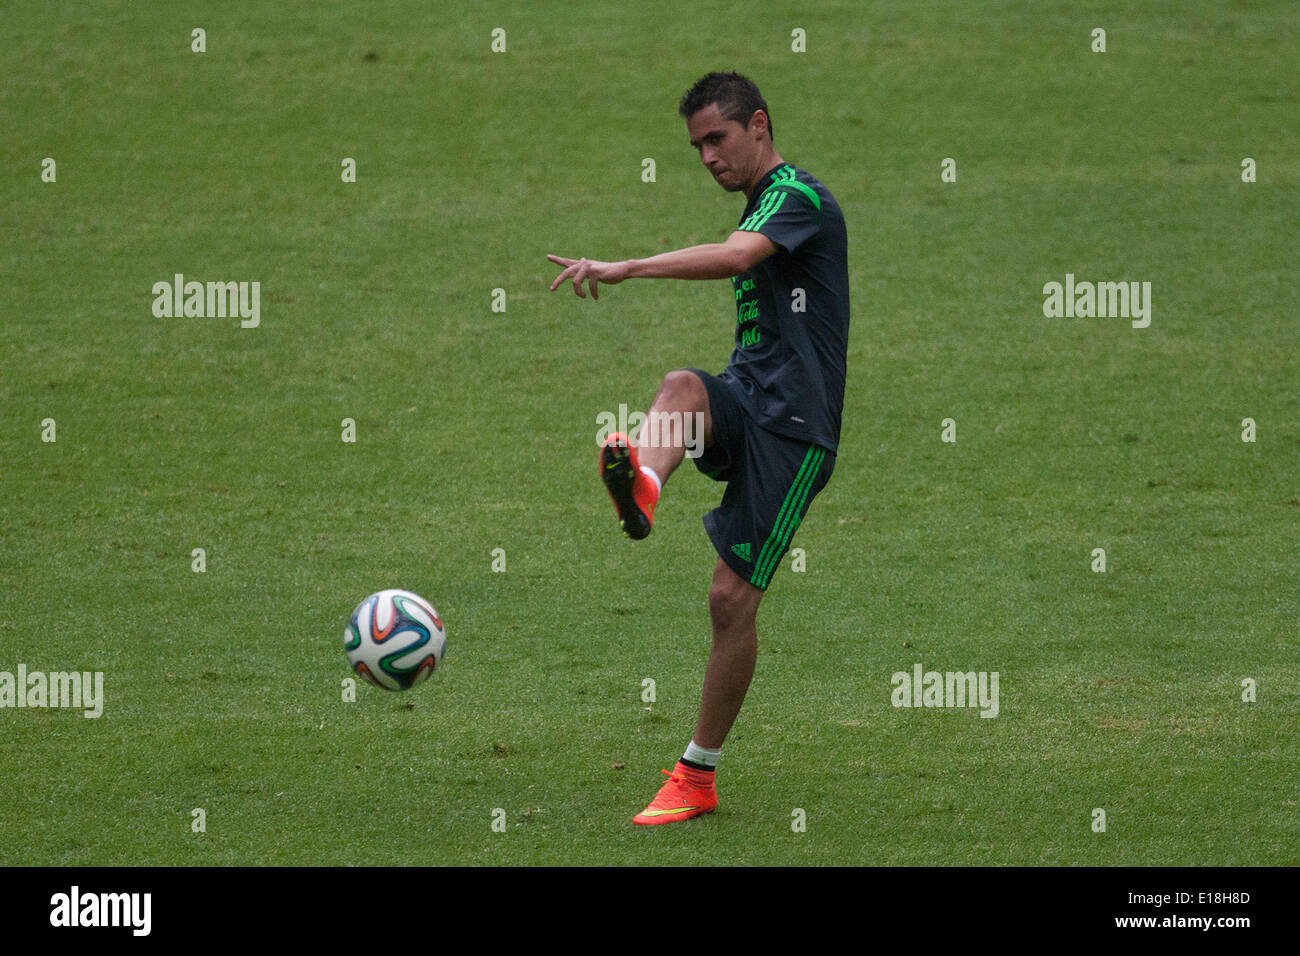 Mexico City, Mexico. 26th May, 2014. Player Paul Aguilar of Mexico's national soccer team, takes part in a training session before the Brazil 2014 FIFA World Cup, in the Azteca Stadium, in Mexico City, capital of Mexico, on May 26, 2014. Credit:  Pedro Mera/Xinhua/Alamy Live News Stock Photo